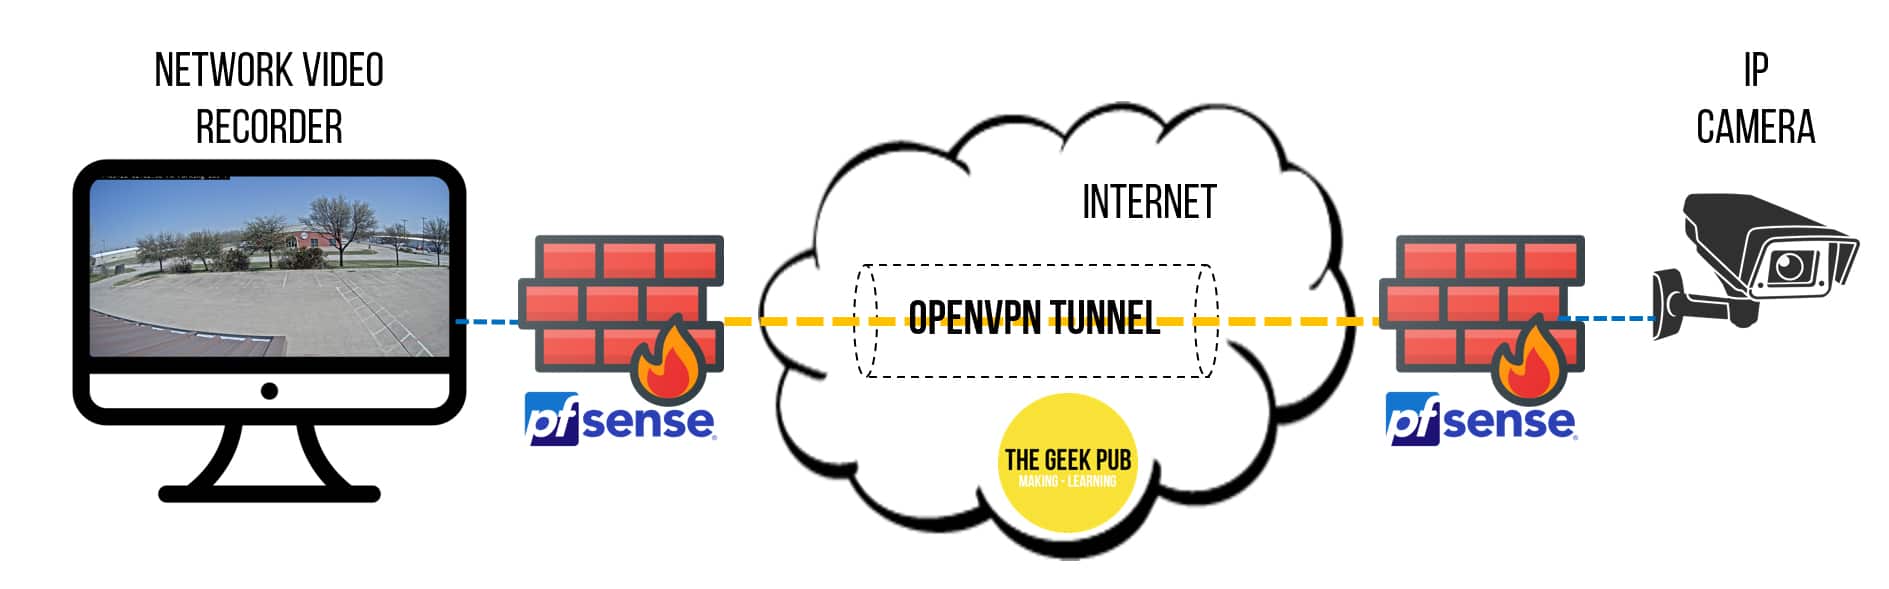 OpenVPN MTU issues with IP security cameras